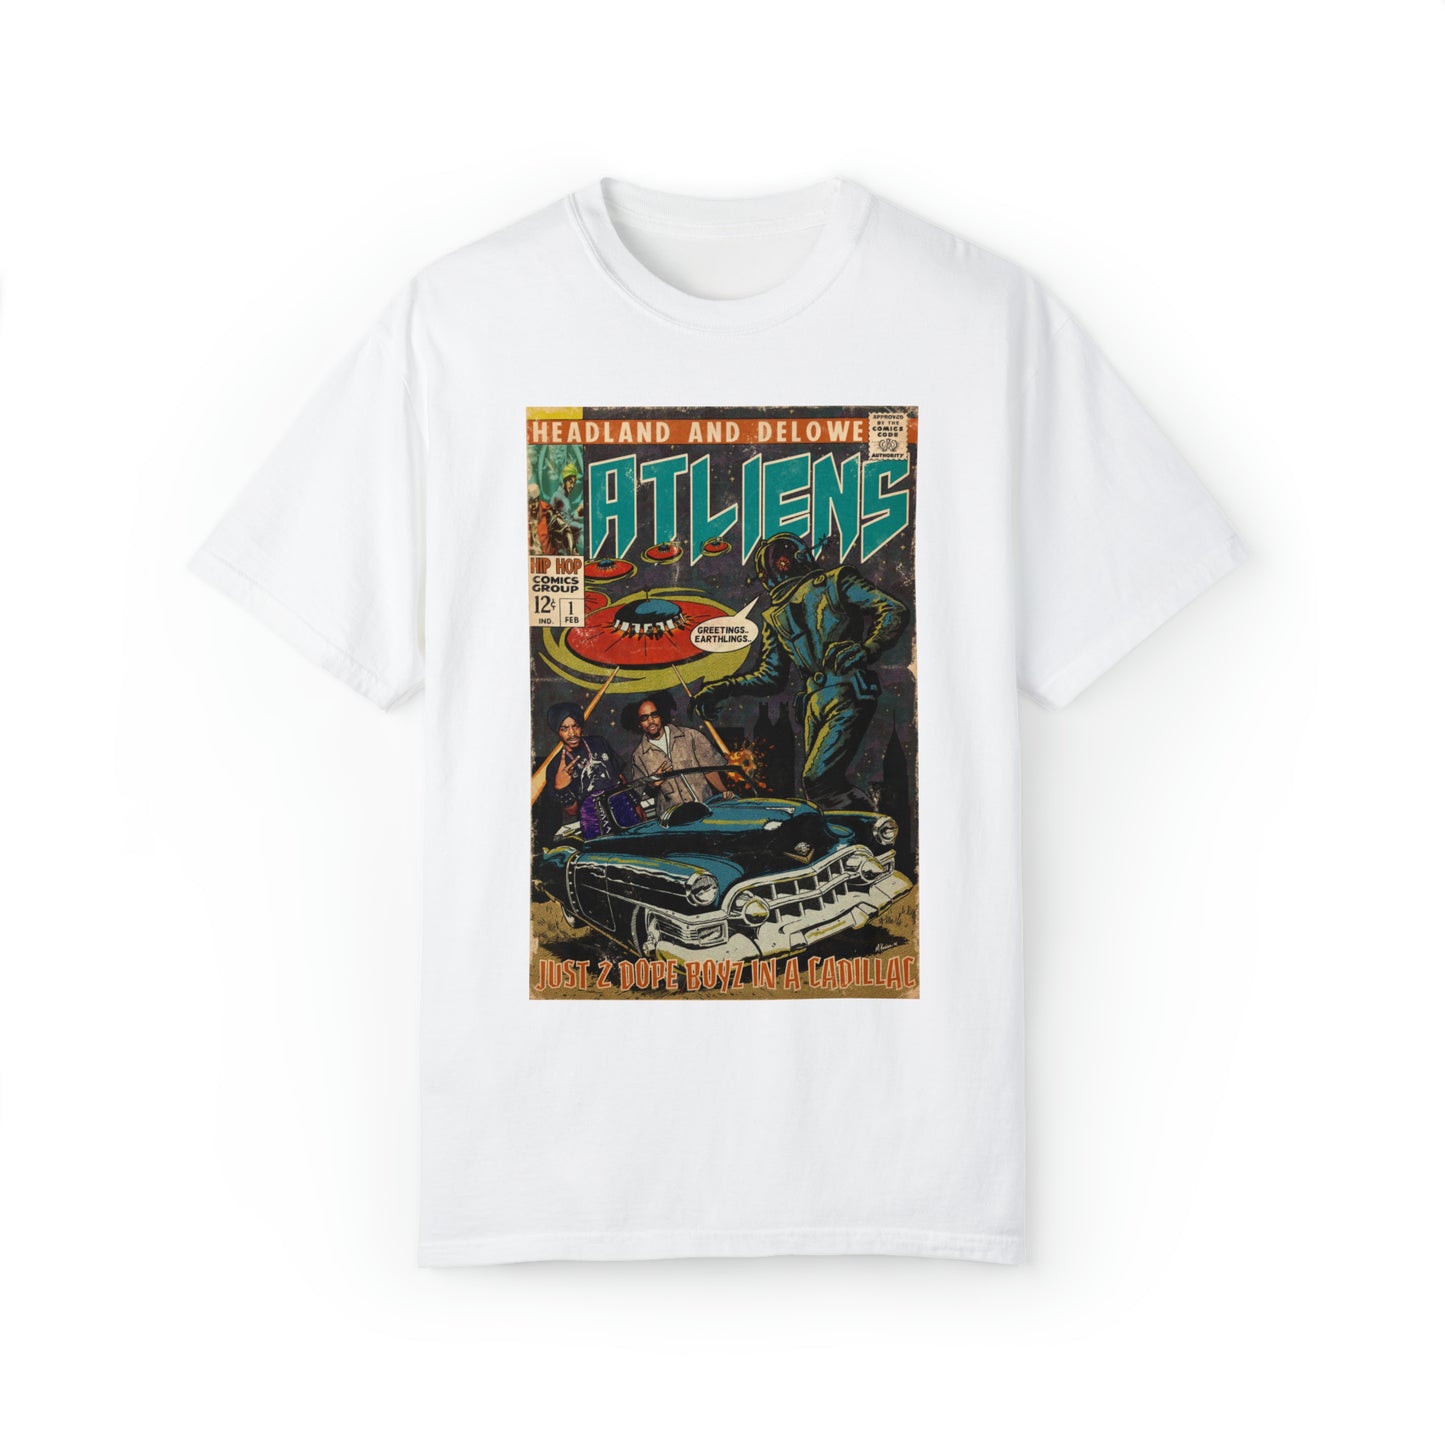 Outkast - Atliens 1 - 2 Dope boyz in a Cadillac - Unisex Comfort Colors T-shirt